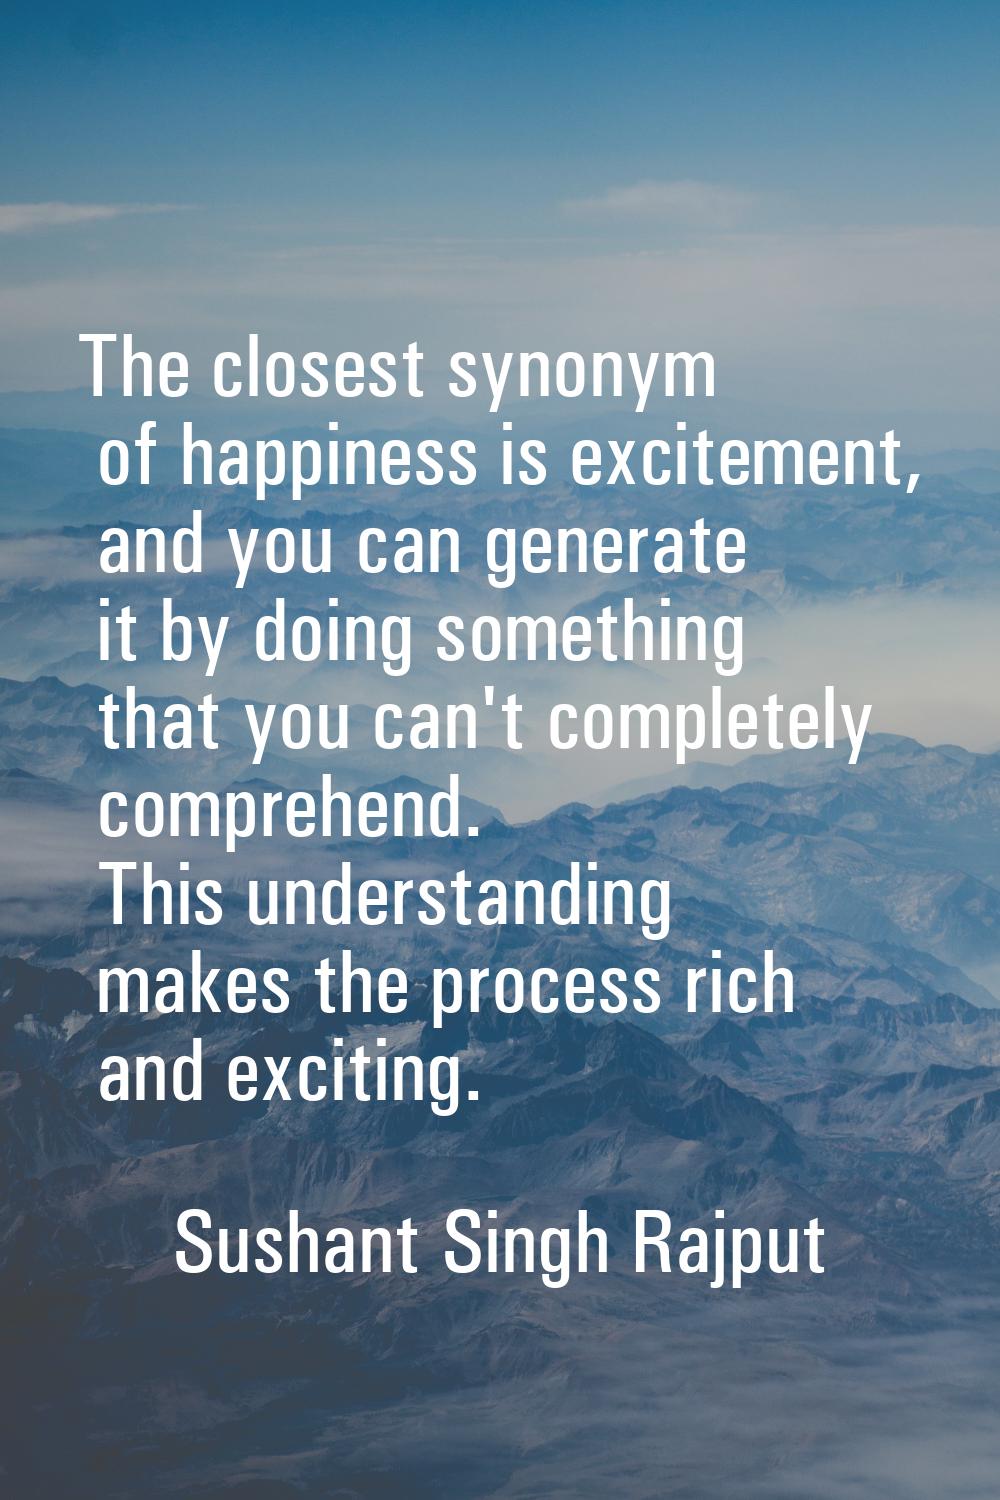 The closest synonym of happiness is excitement, and you can generate it by doing something that you